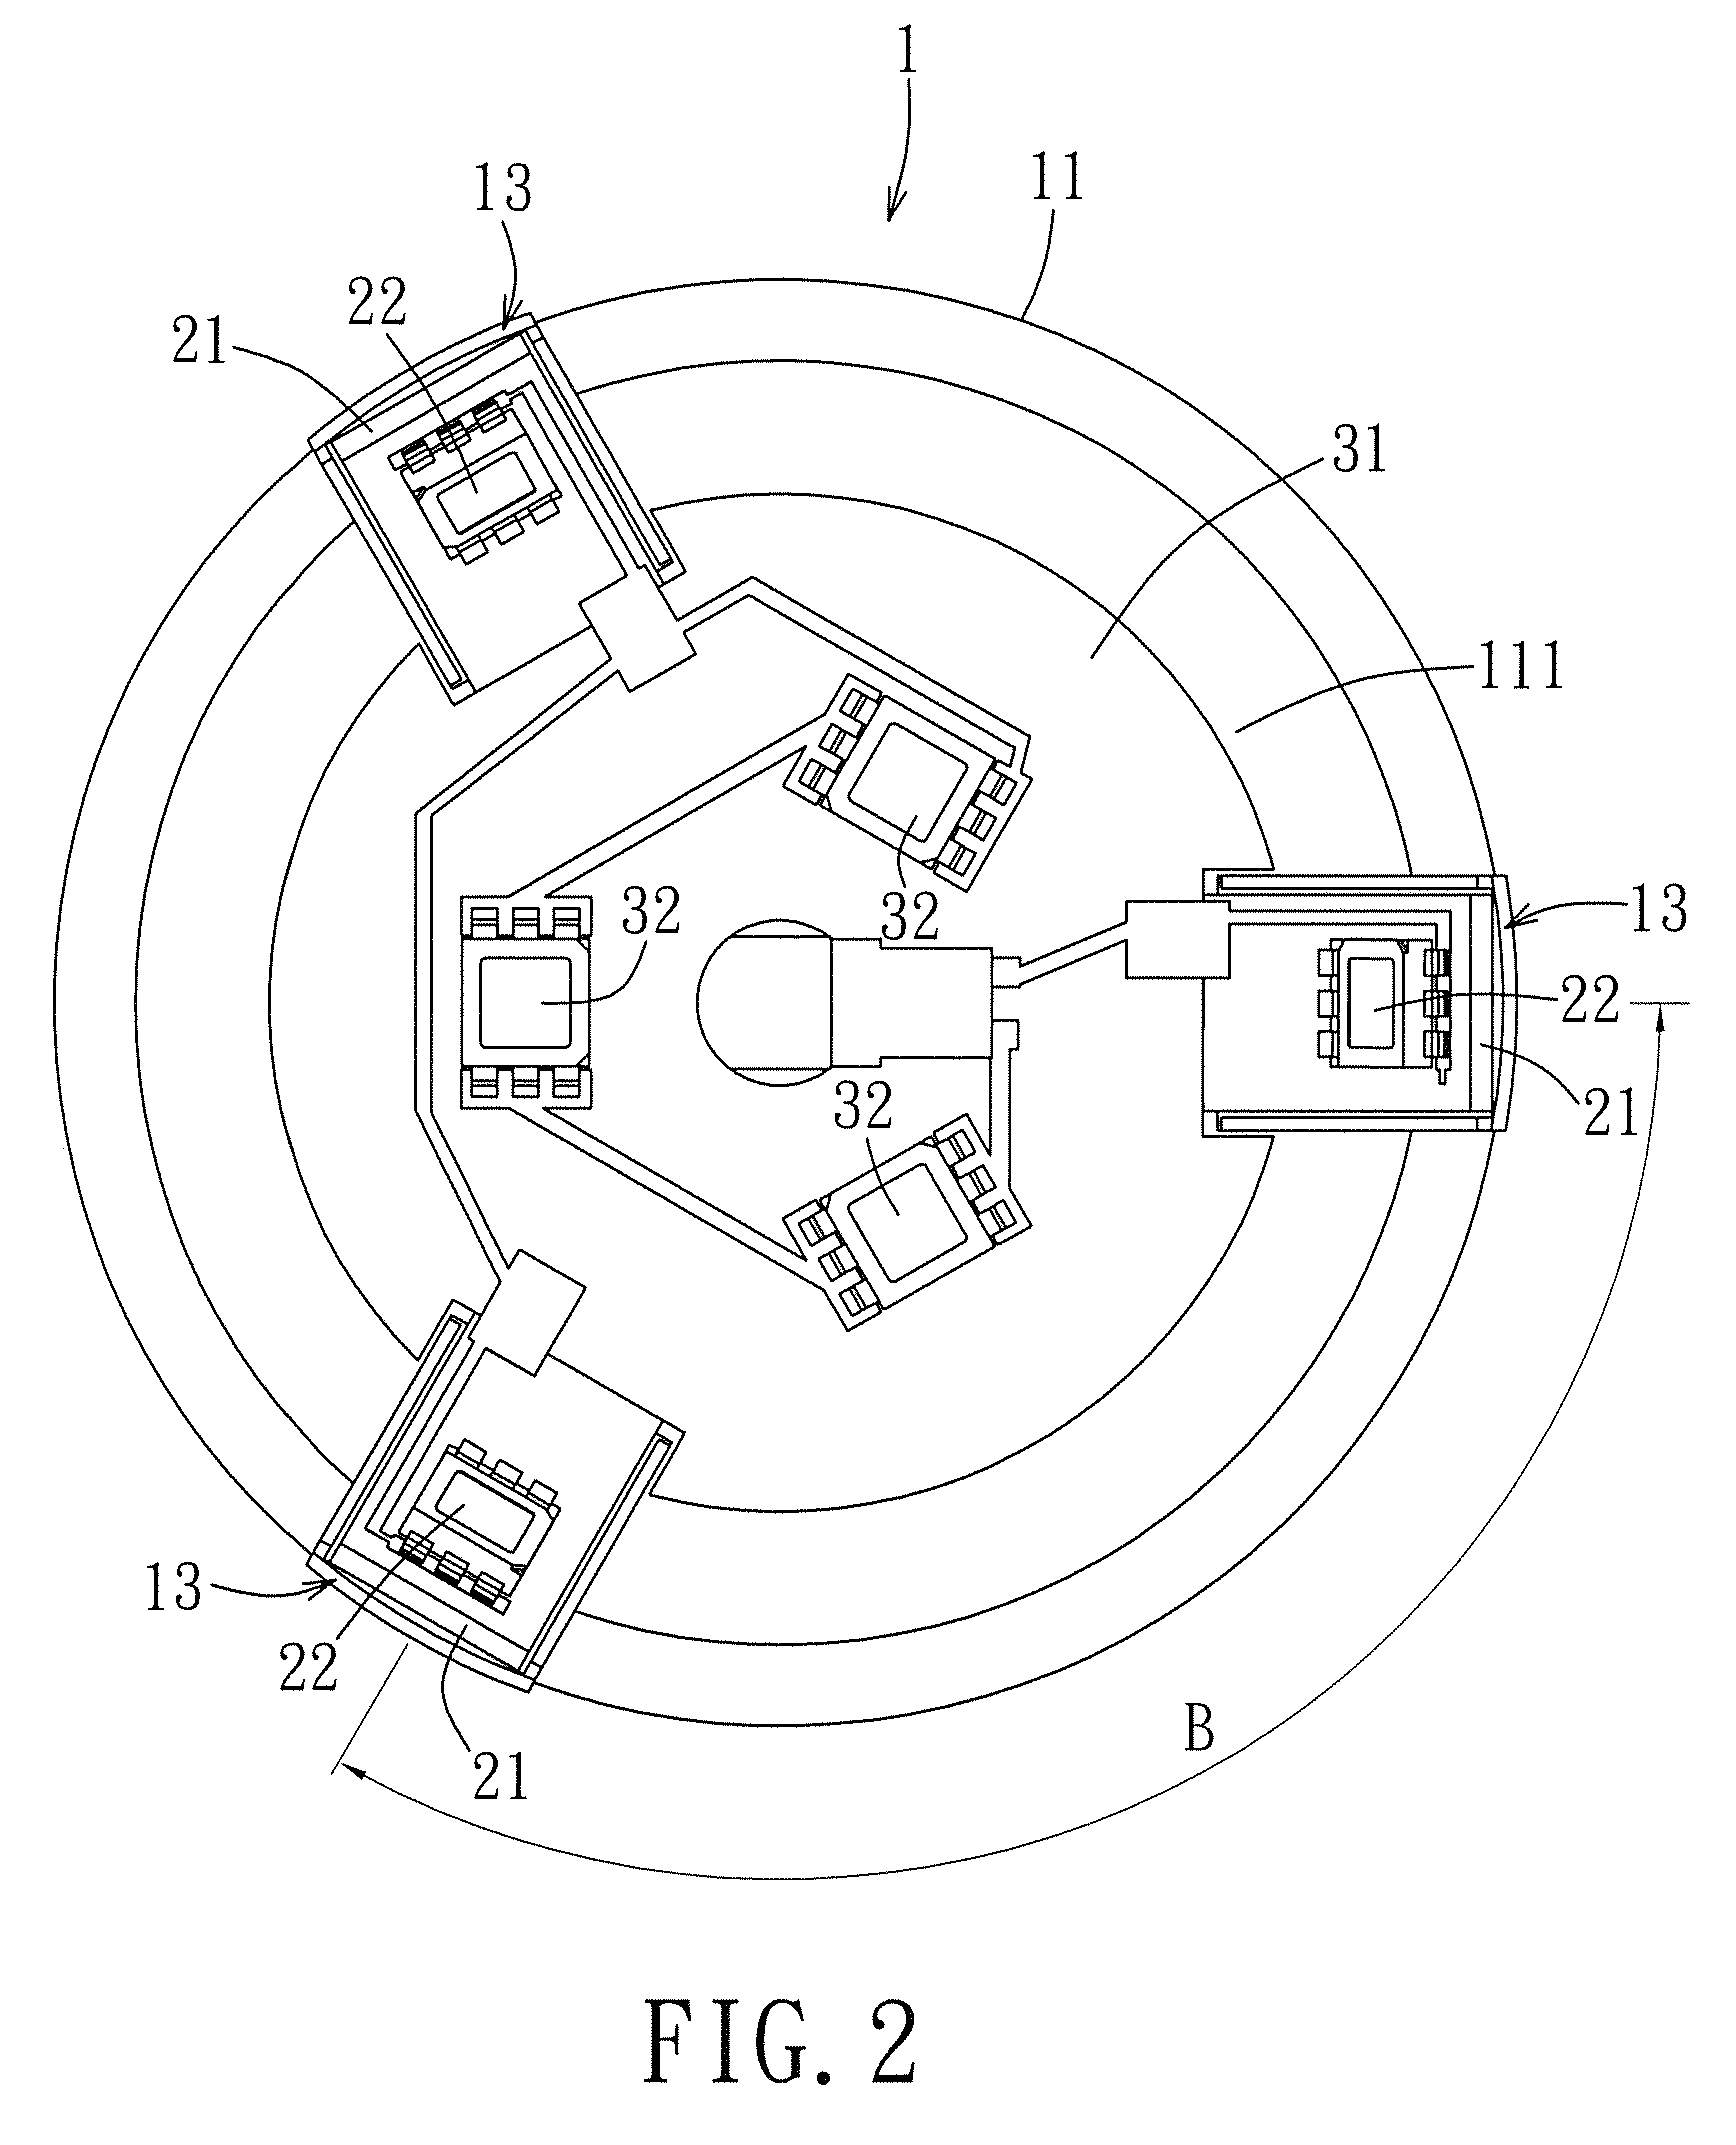 Luminaire having light-emitting elements disposed on protrusions